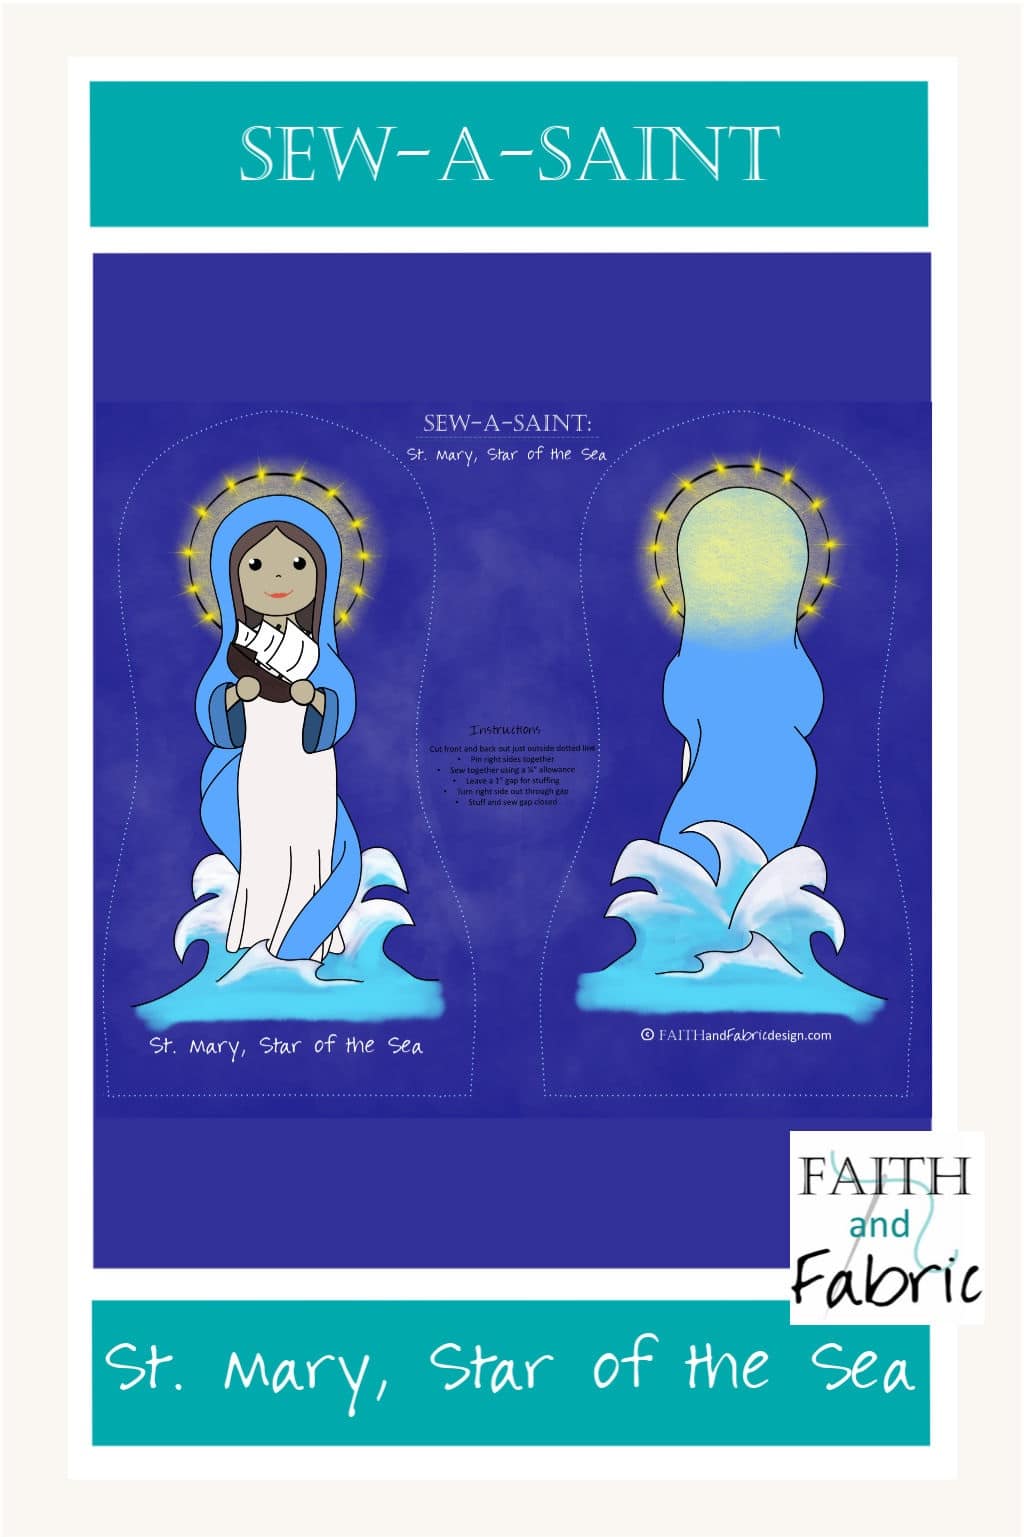 St. Mary, Star of the Sea Fabric Sew-a-Saint